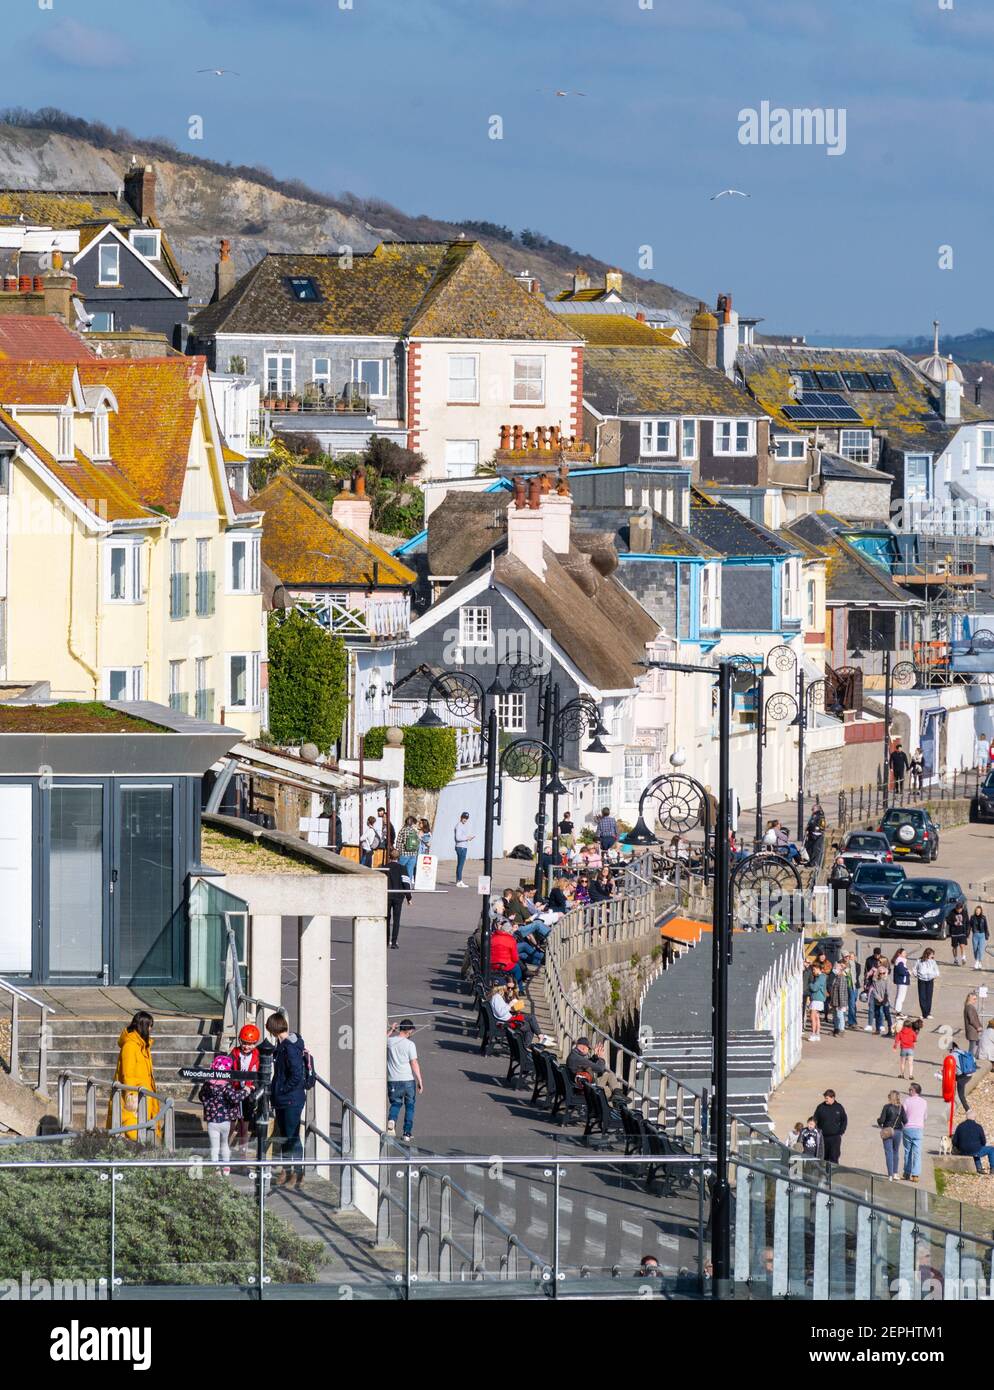 Lyme Regis, Dorset, UK. 27th Feb, 2021. UK Weather: Plenty of people were out and about enjoying unsesasonably warm and sunny weather at the seaside resort of Lyme Regis this afternoon. Credit: Celia McMahon/Alamy Live News Stock Photo